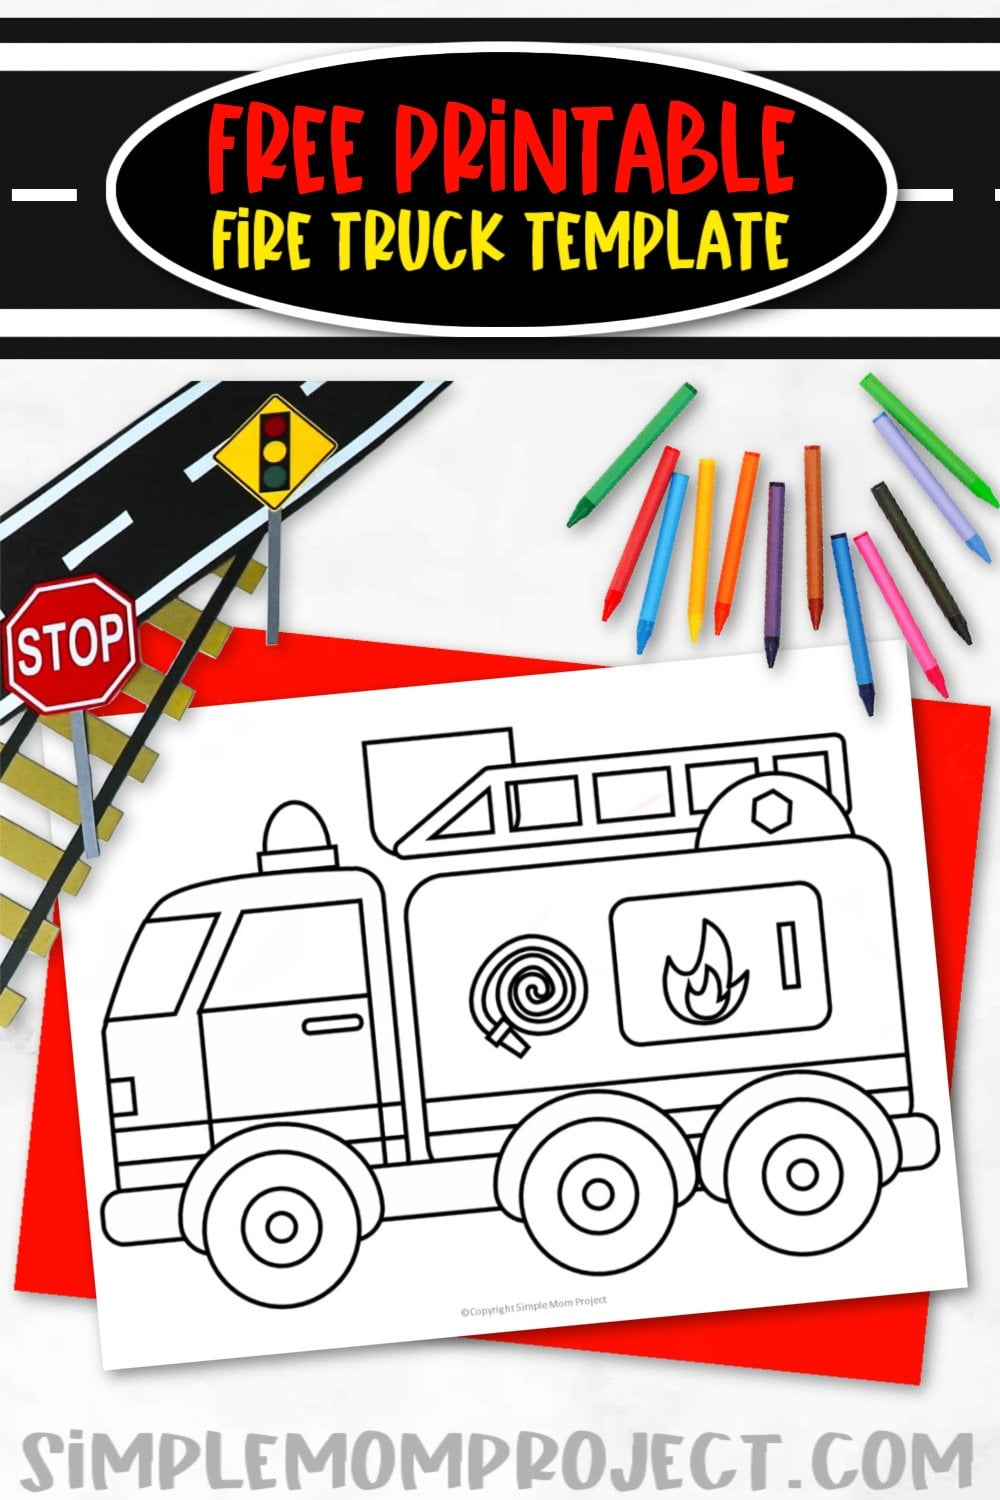 printable-fire-truck-craft-template-free-printable